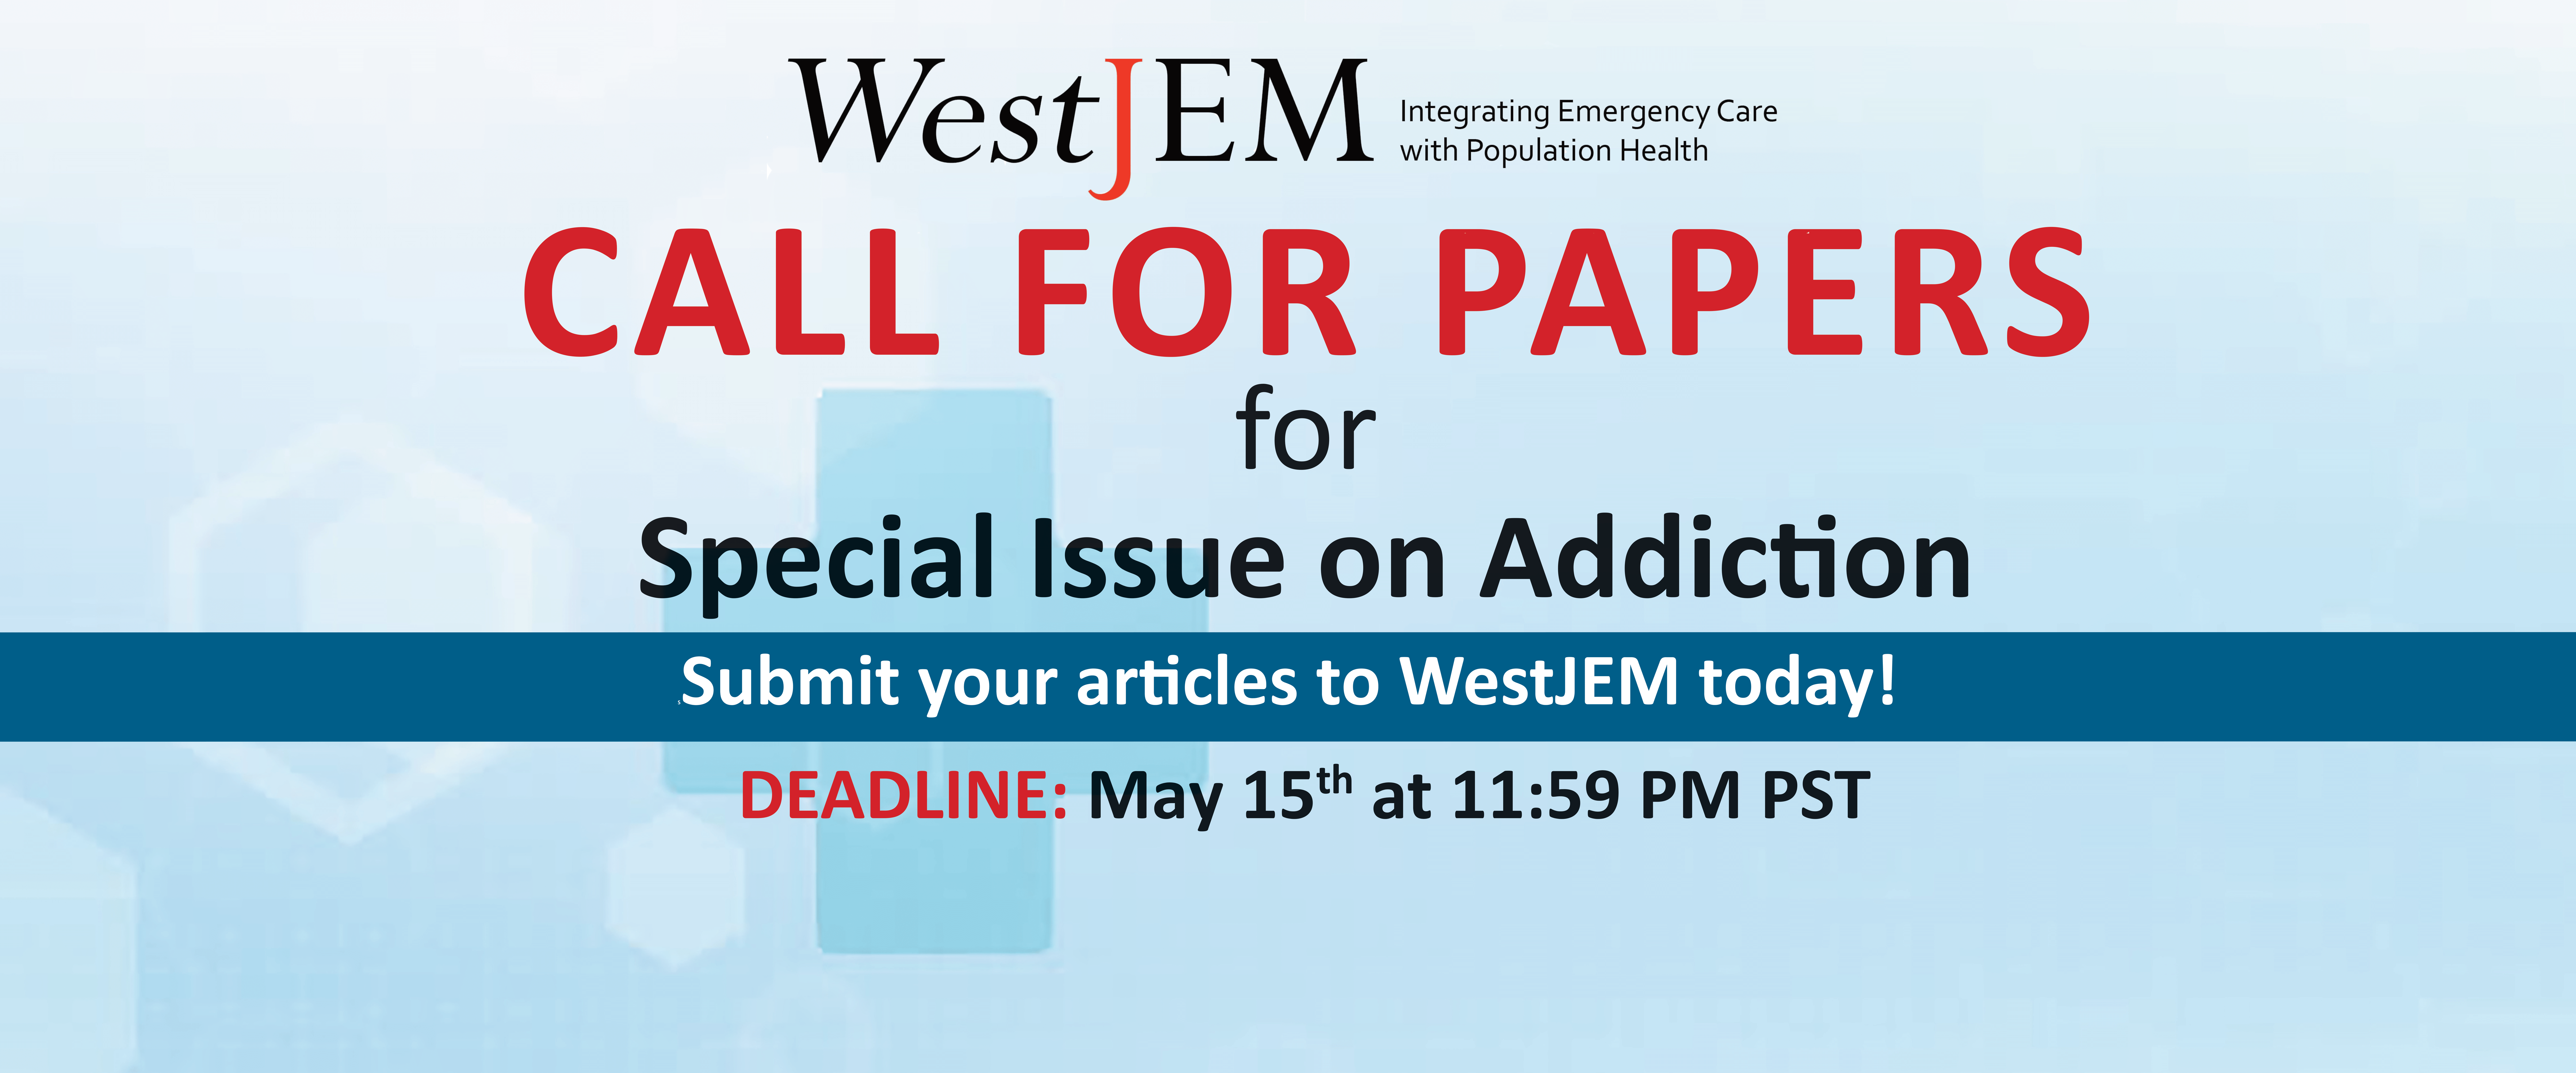 Call-for-Papers-for-Special-Issue-on-Addiction-Banner-1